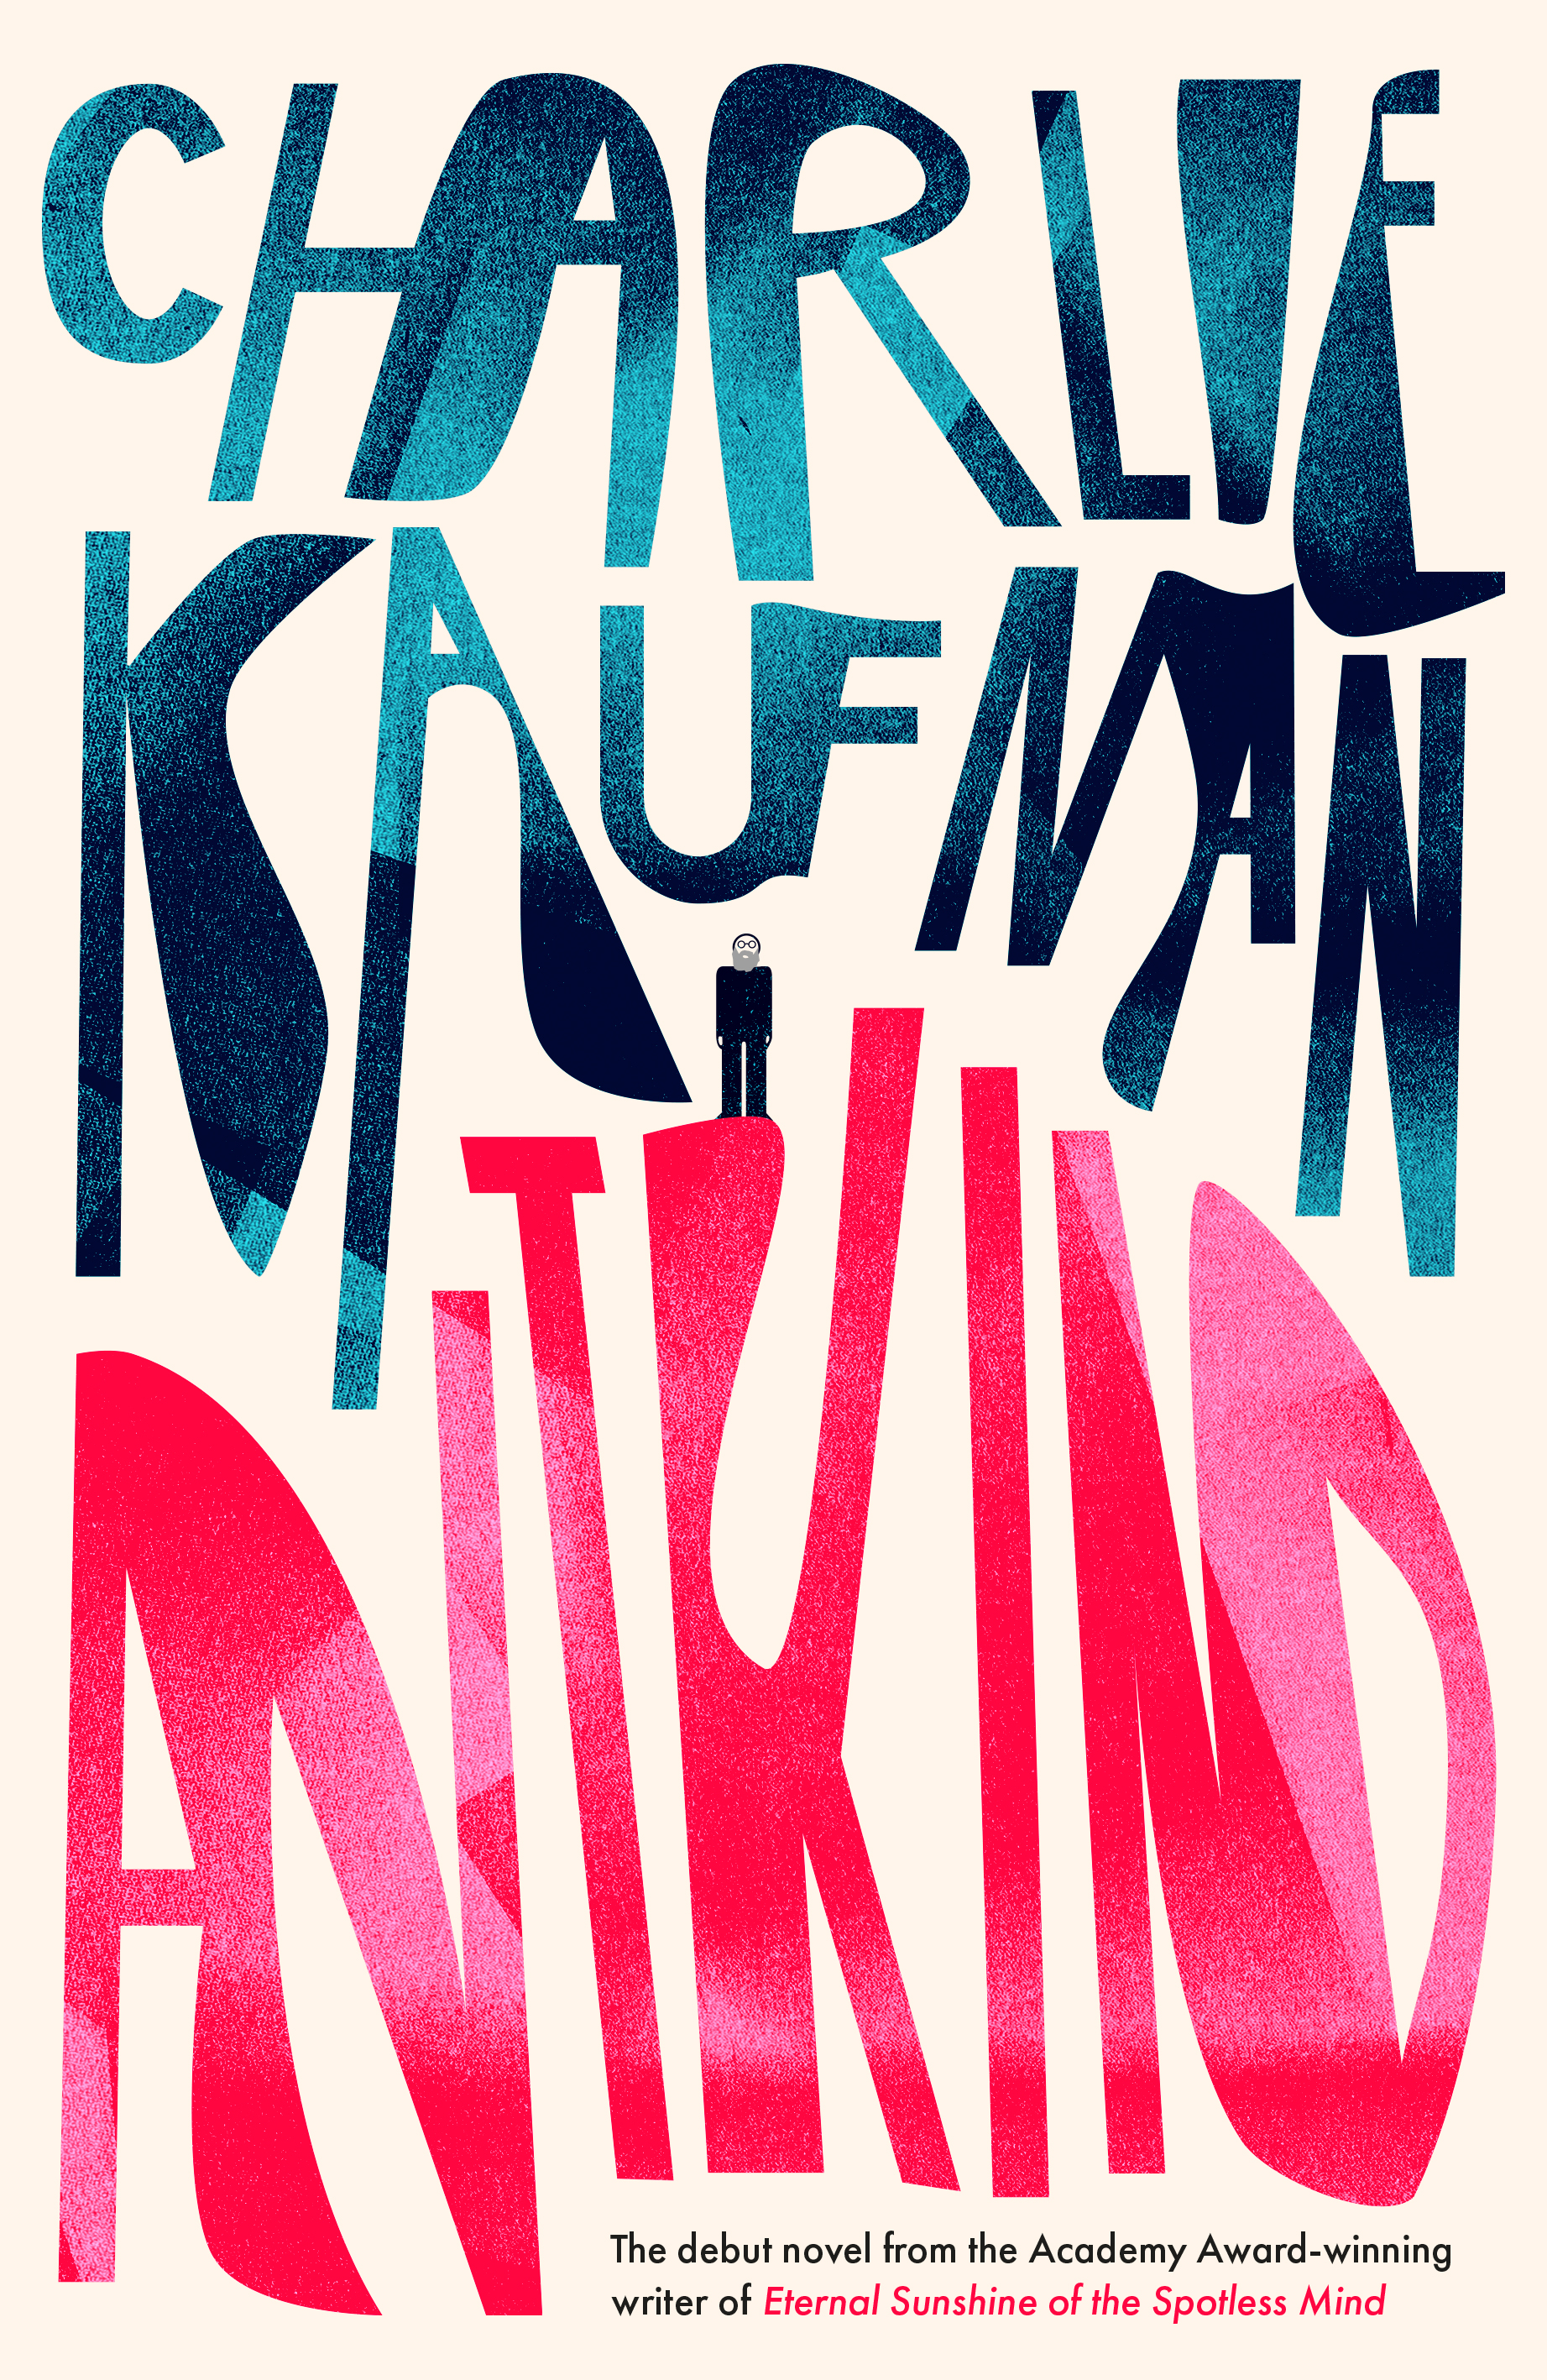 Cover image: Cover for Antkind by Charlie Kaufman